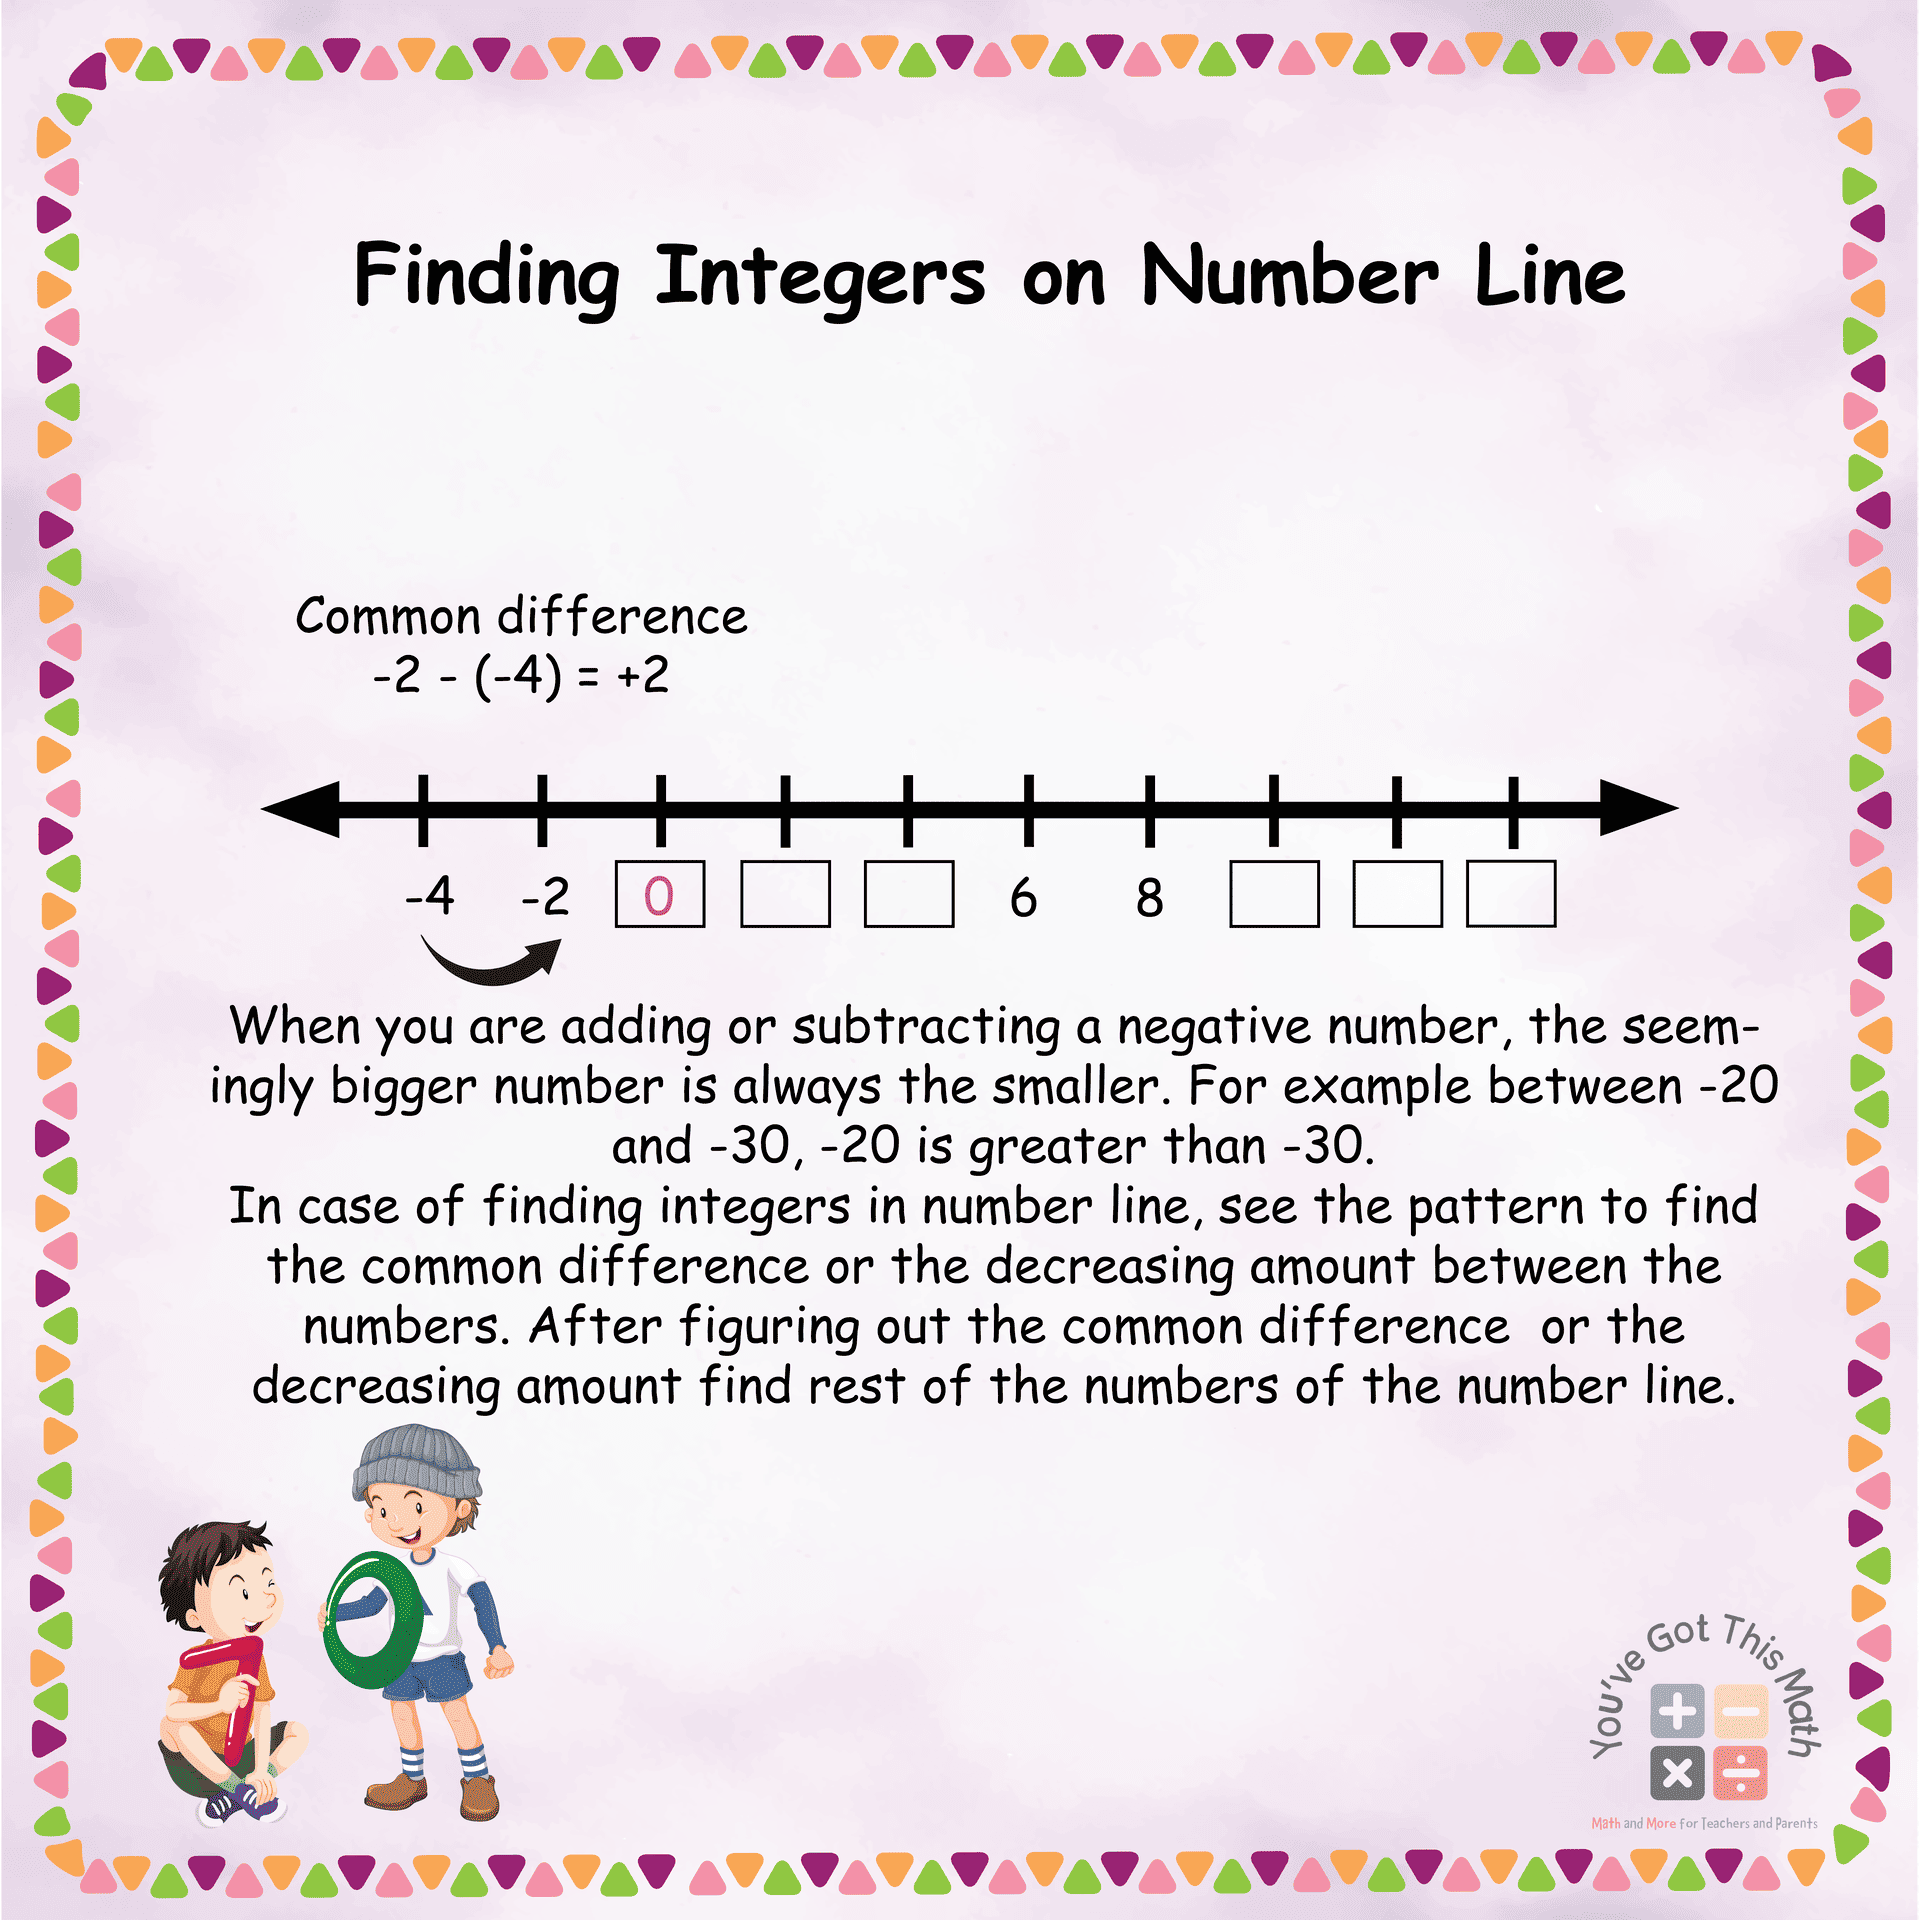 Finding Integers on Number Line